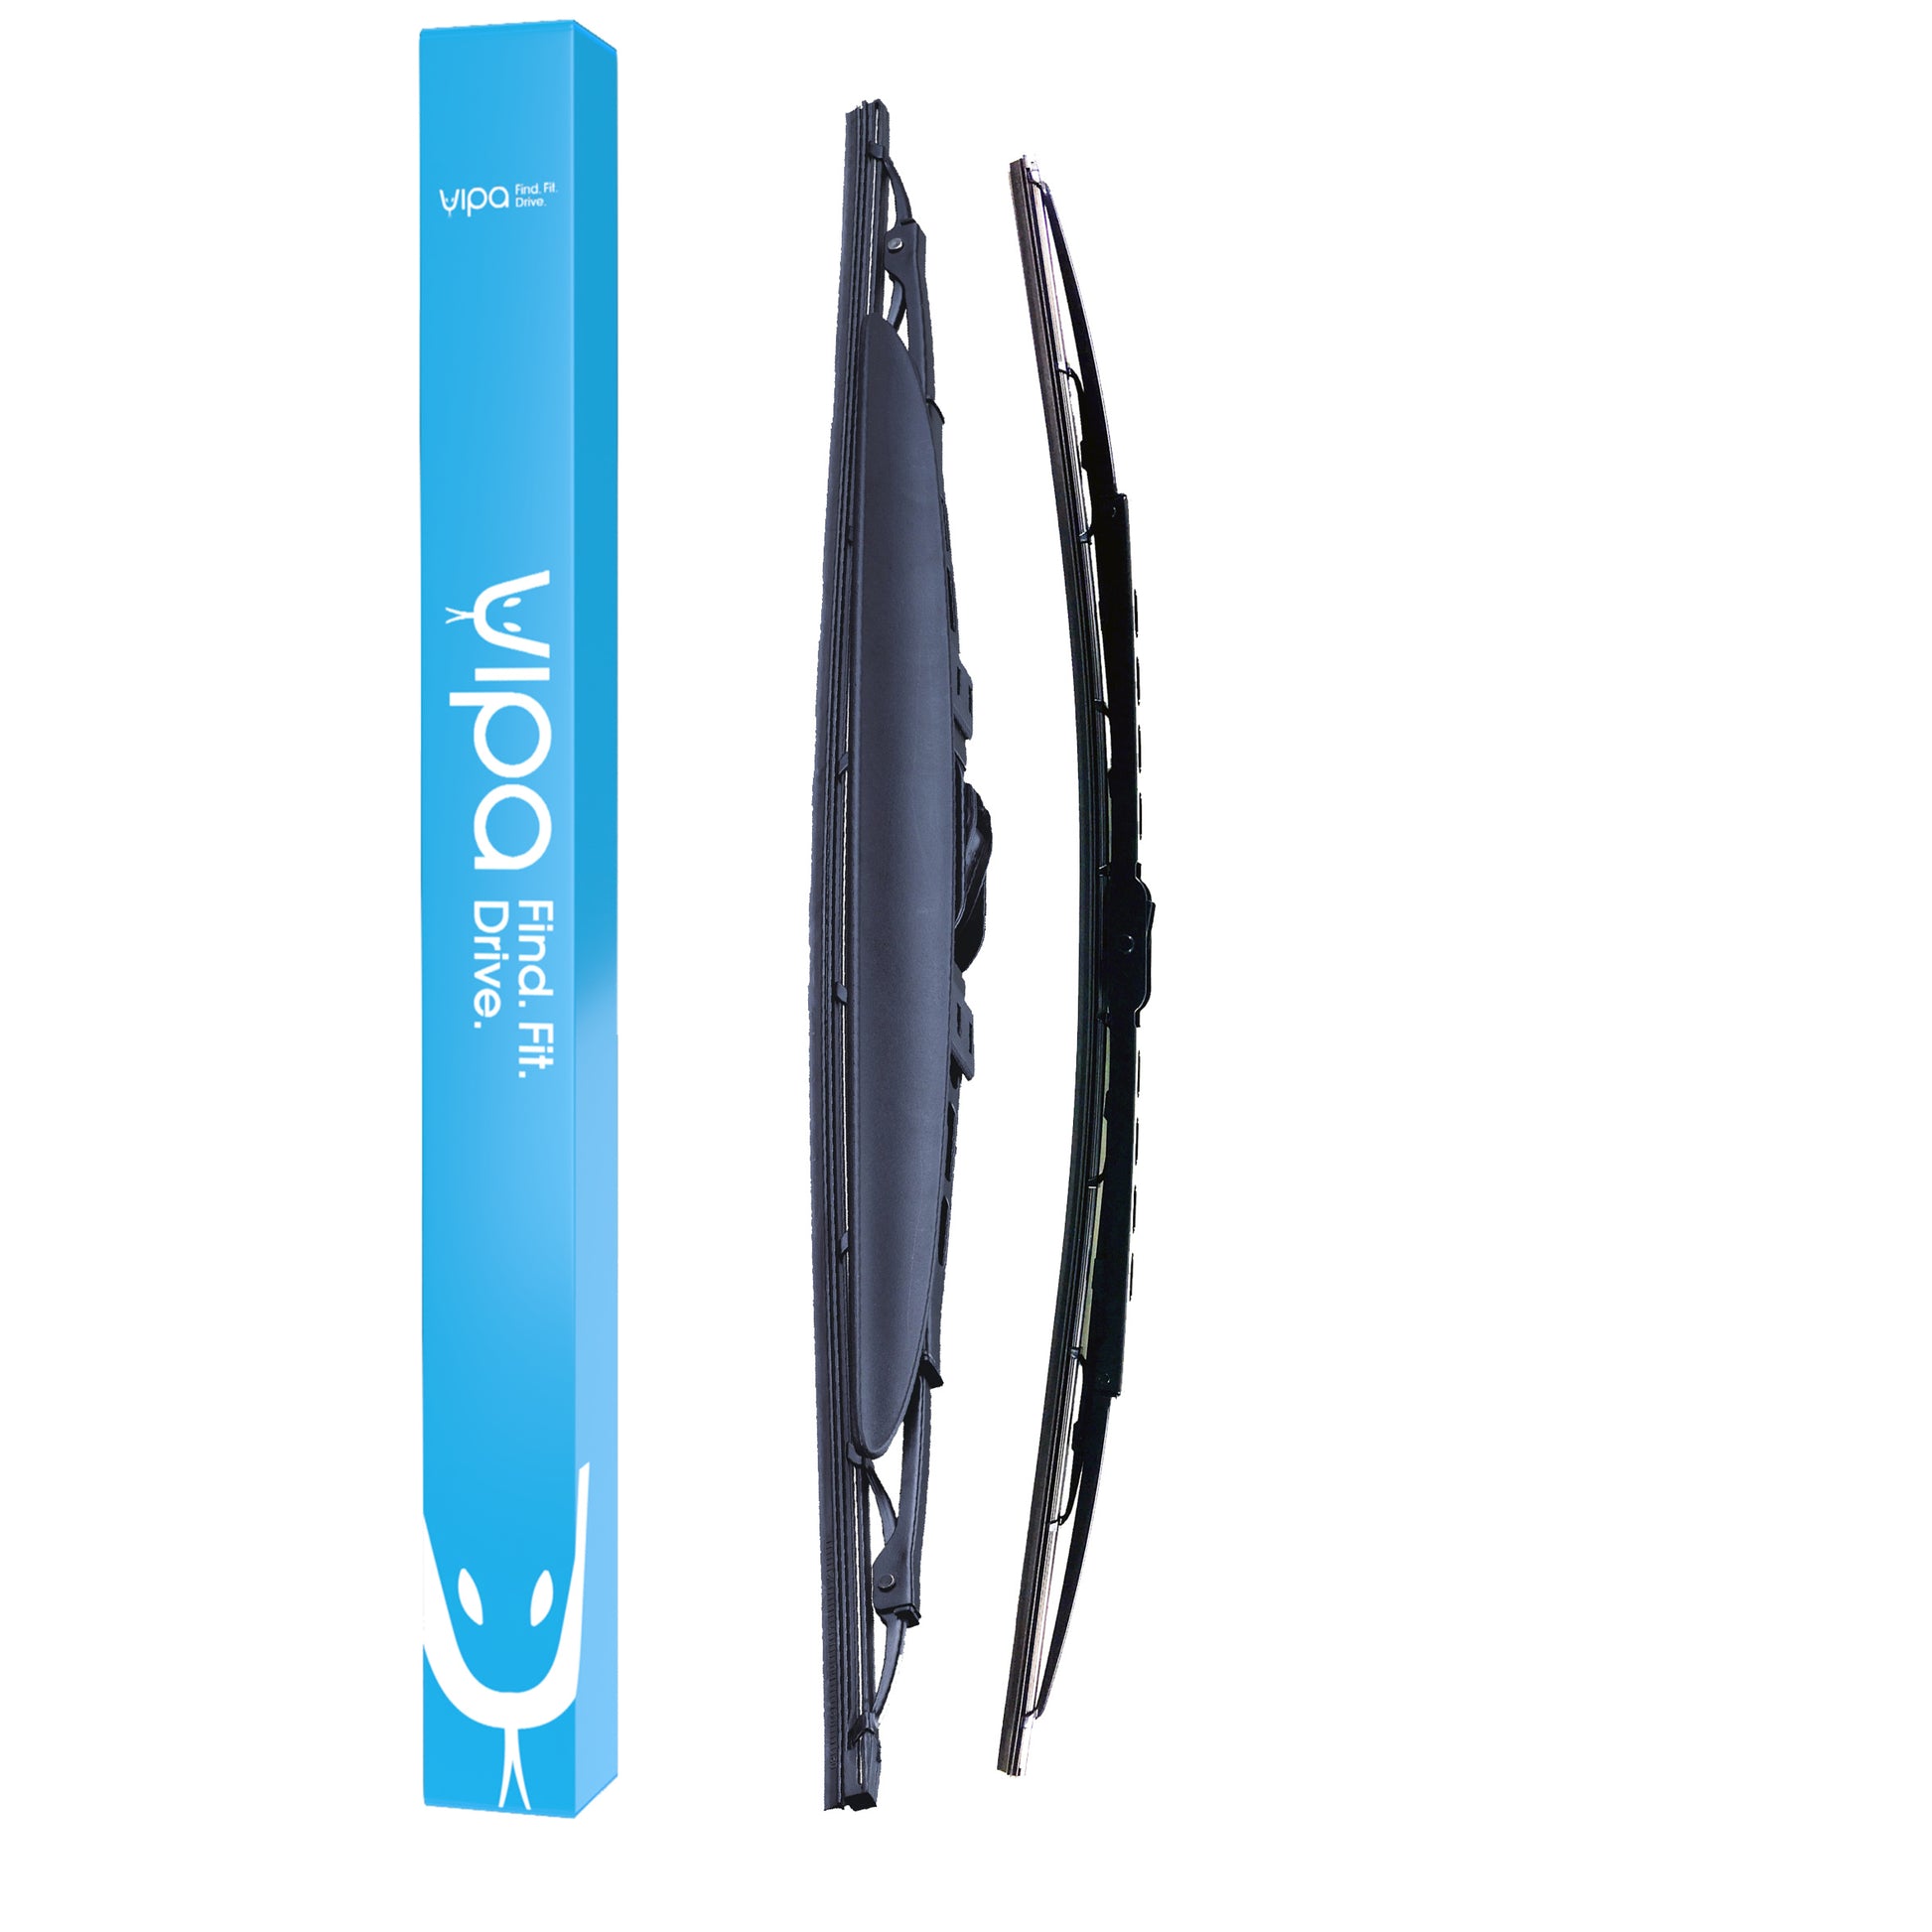 VW TRANSPORTER / CARAVELLE MPV Apr 2003 to May 2013 Wiper Blade Kit